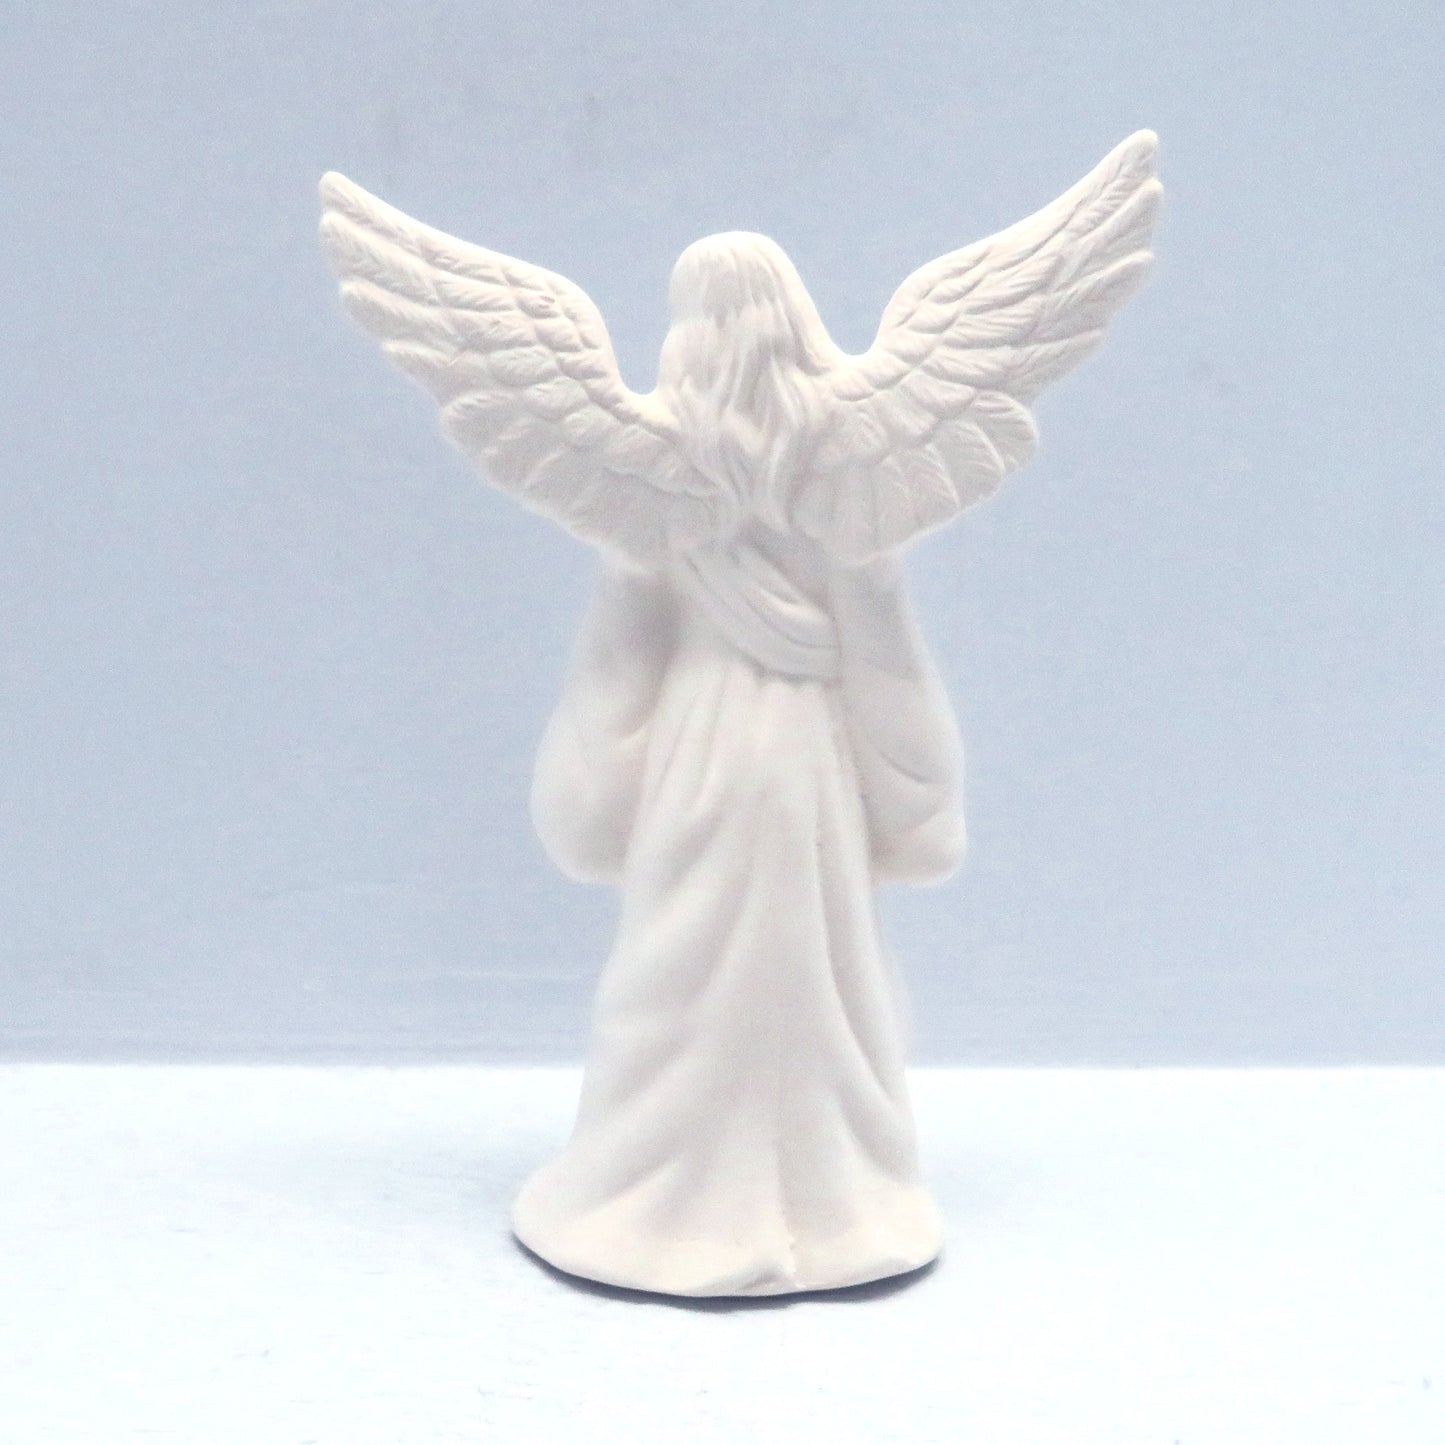 Unpainted Ceramic Bisque Angel Figurine / Angel With Wings Up / Ready to Paint / Ceramics to Paint / Angel Statue / Paintable Ceramics